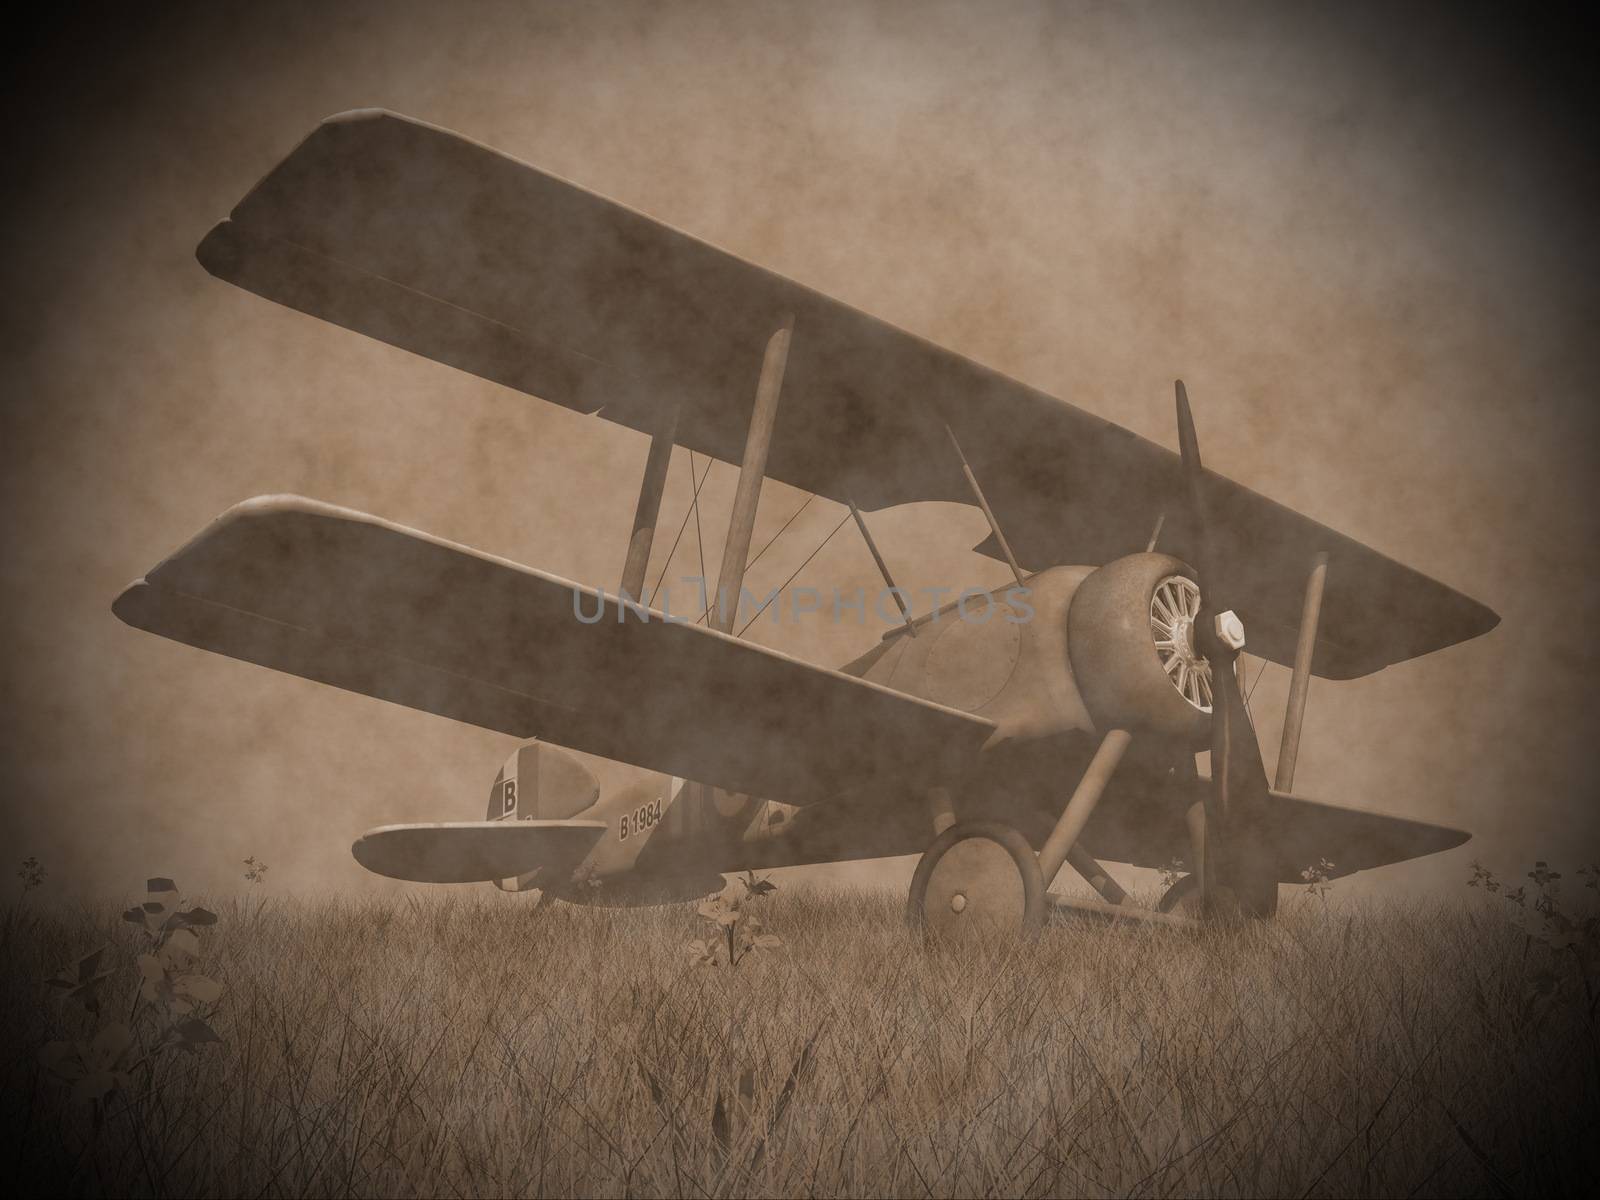 Vintage image of a biplane standing on the grass with flowers